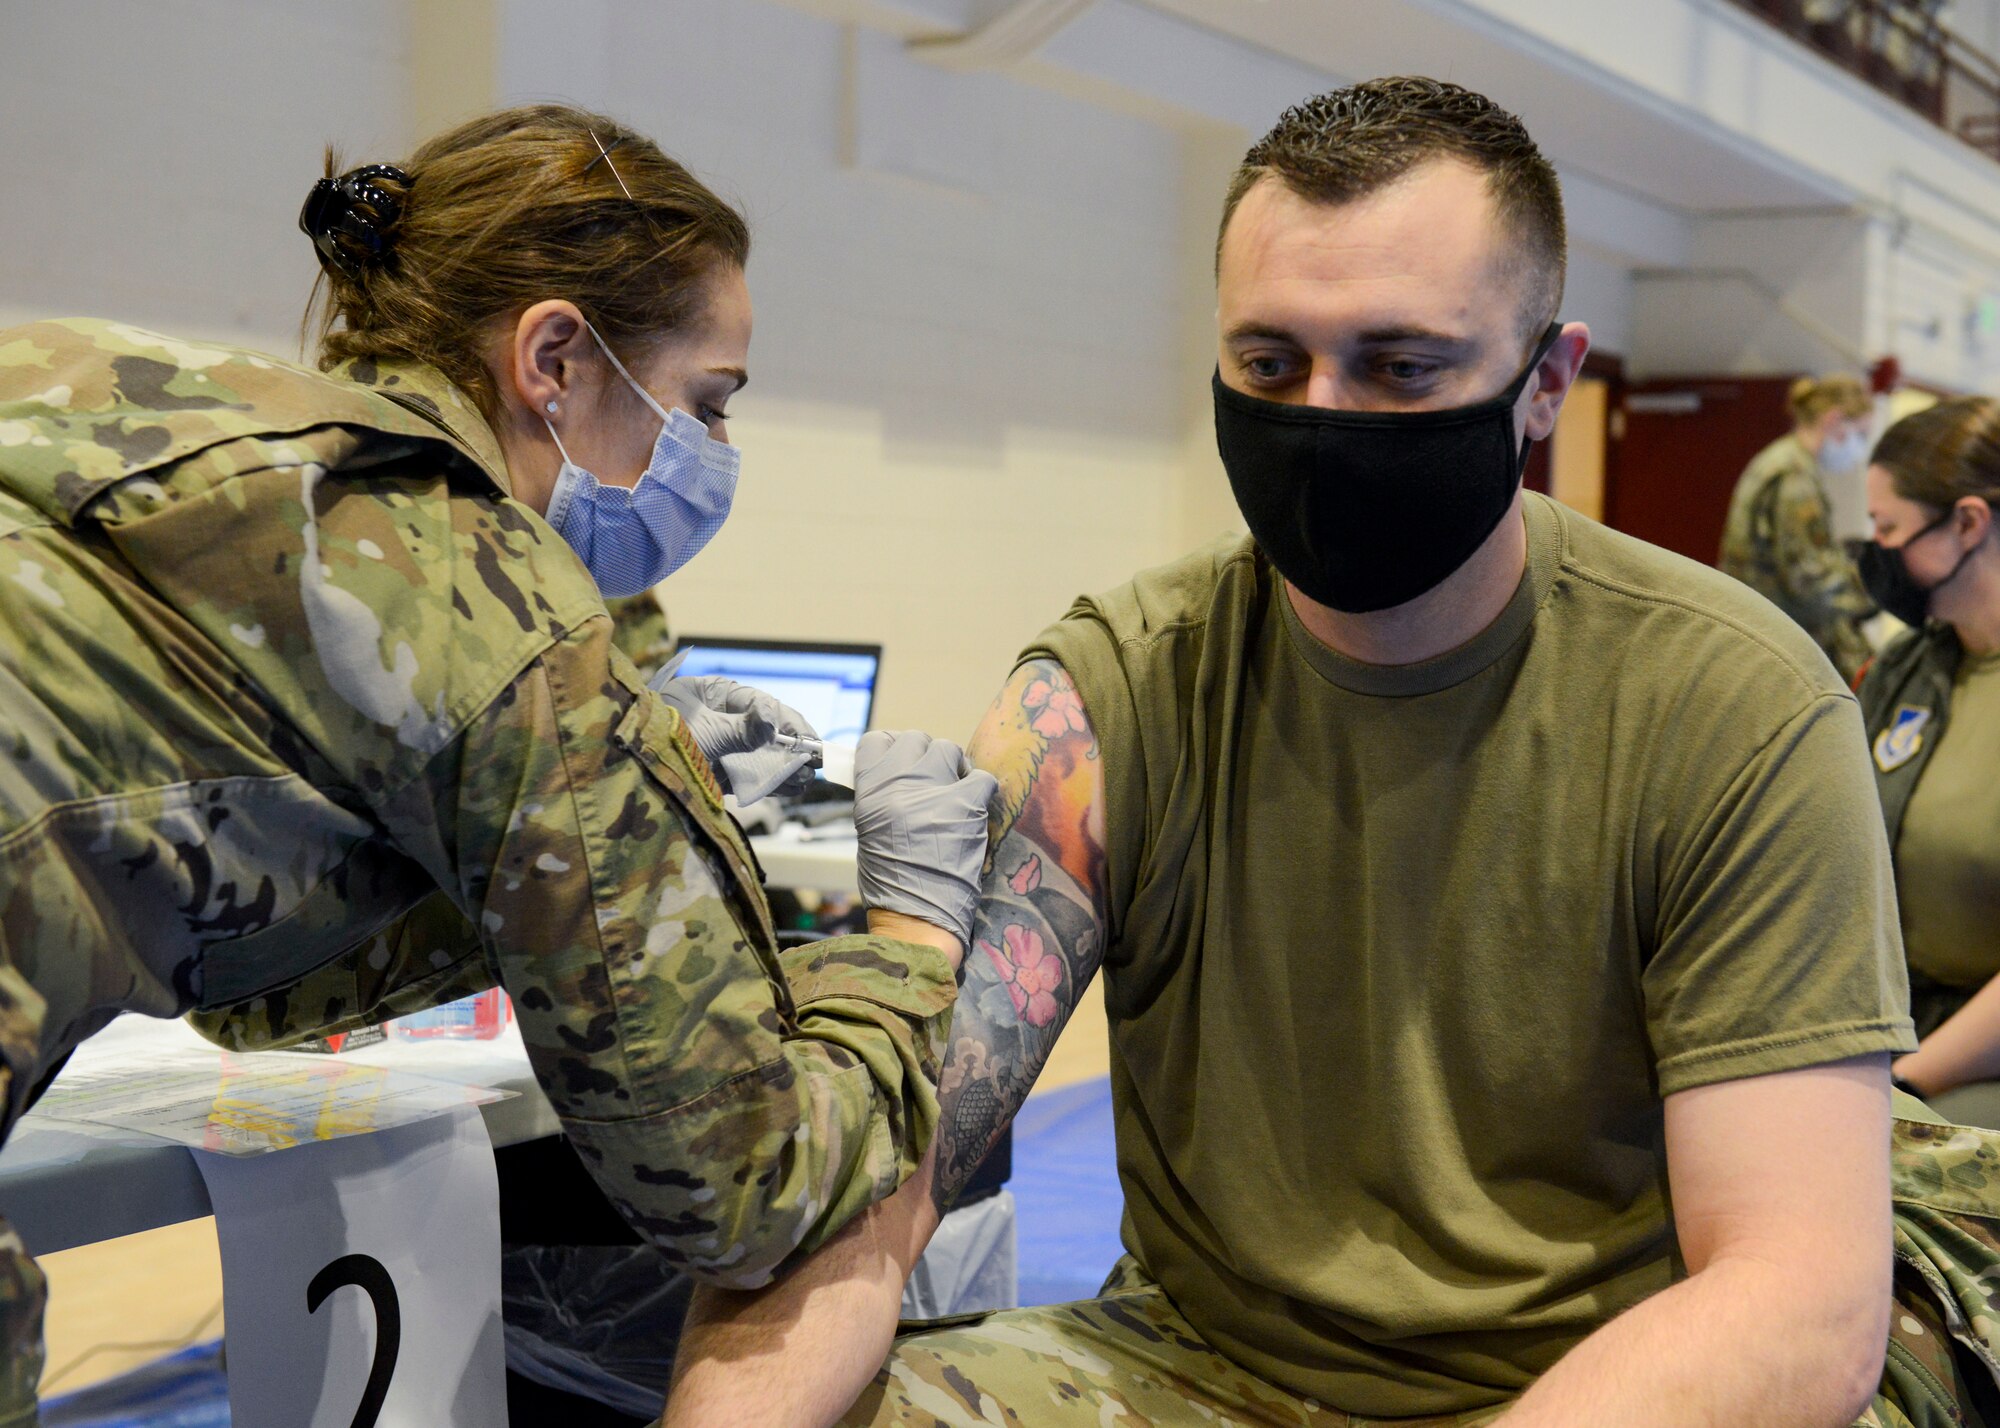 Tech. Sgt. Jerry Dye receives a COVID-19 vaccination at Joint Base Elmendorf-Richardson Jan. 14, 2020. Dye was motivated to get the vaccine after his 6-year-old son nearly died of complications of the disease.